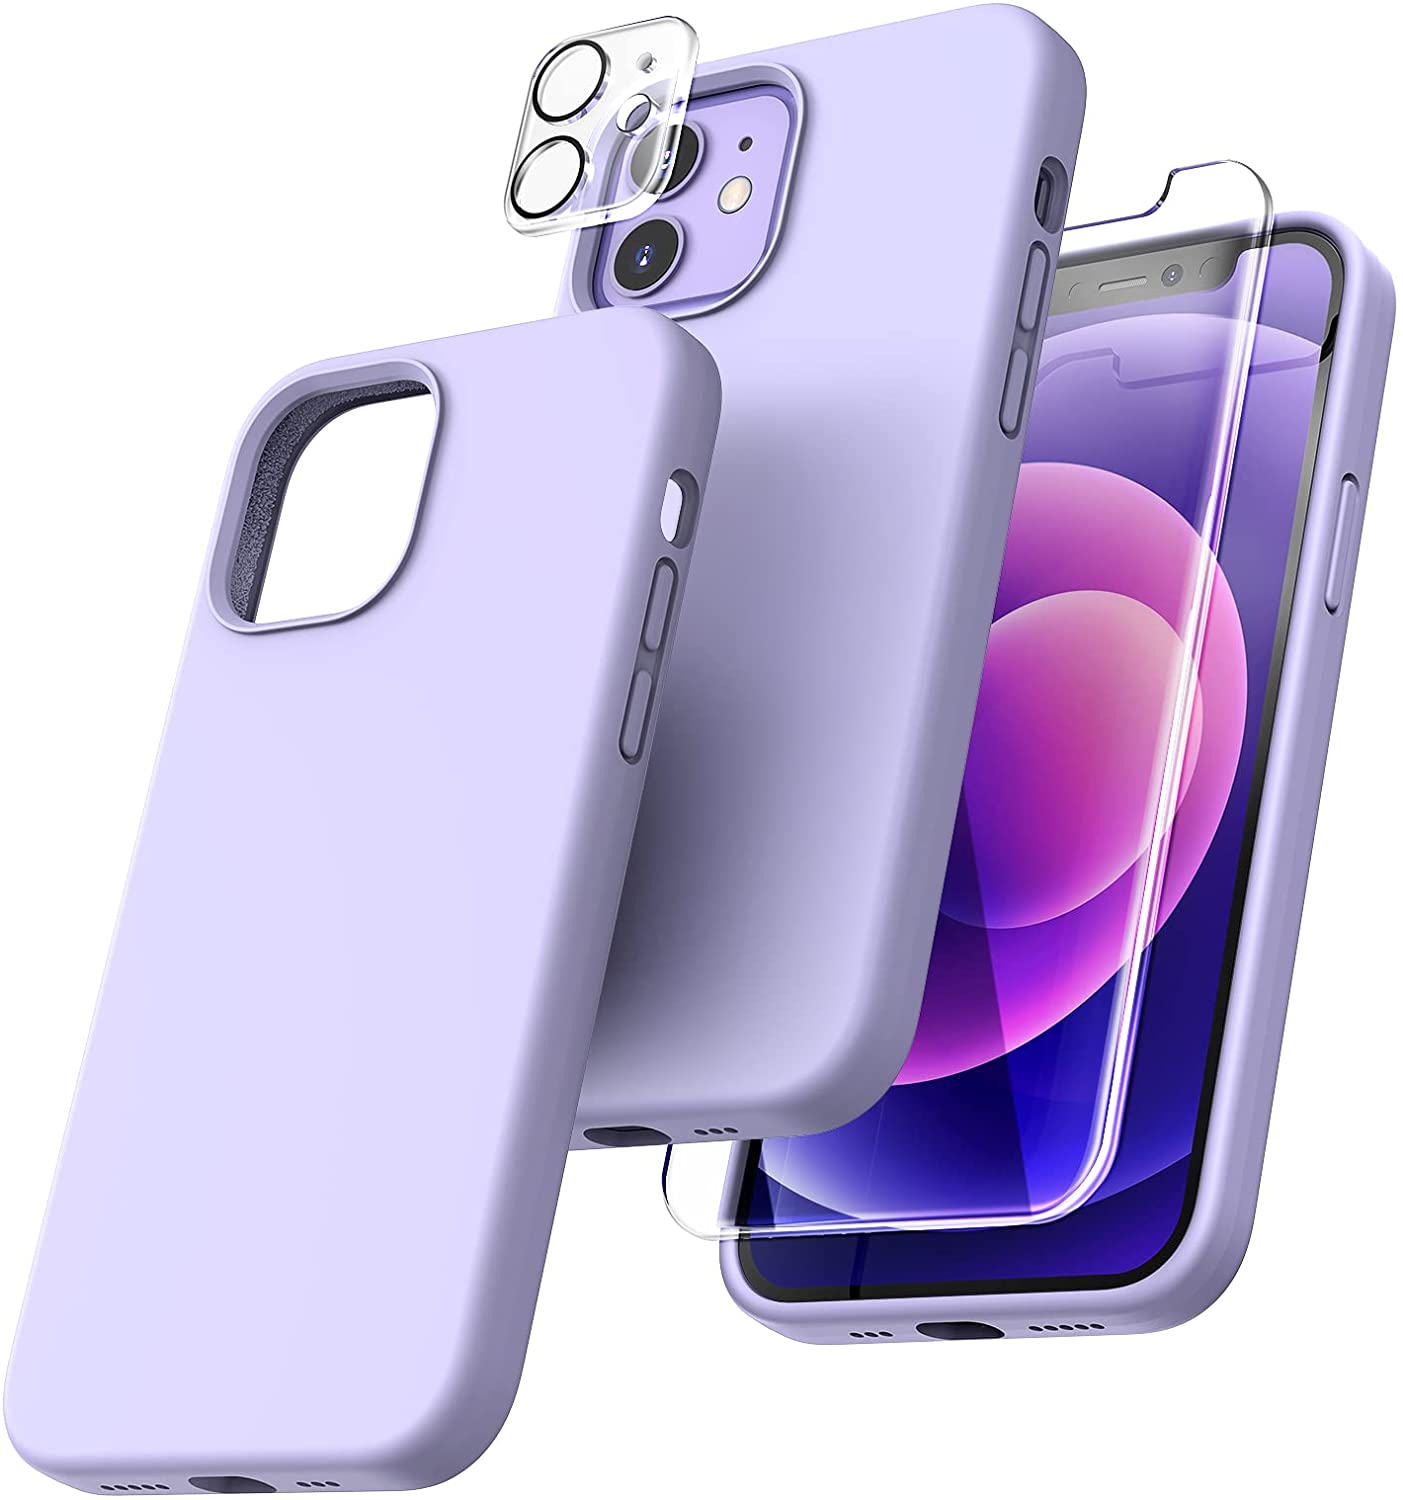 TOCOL [5 in 1] Phone Cases for iPhone 12/12 Pro, with 2 Pack Screen Protector + 2 Pack Camera Lens Protector, Silicone Shockproof Phone Case [Anti-Scratch] [Drop Protection], Purple